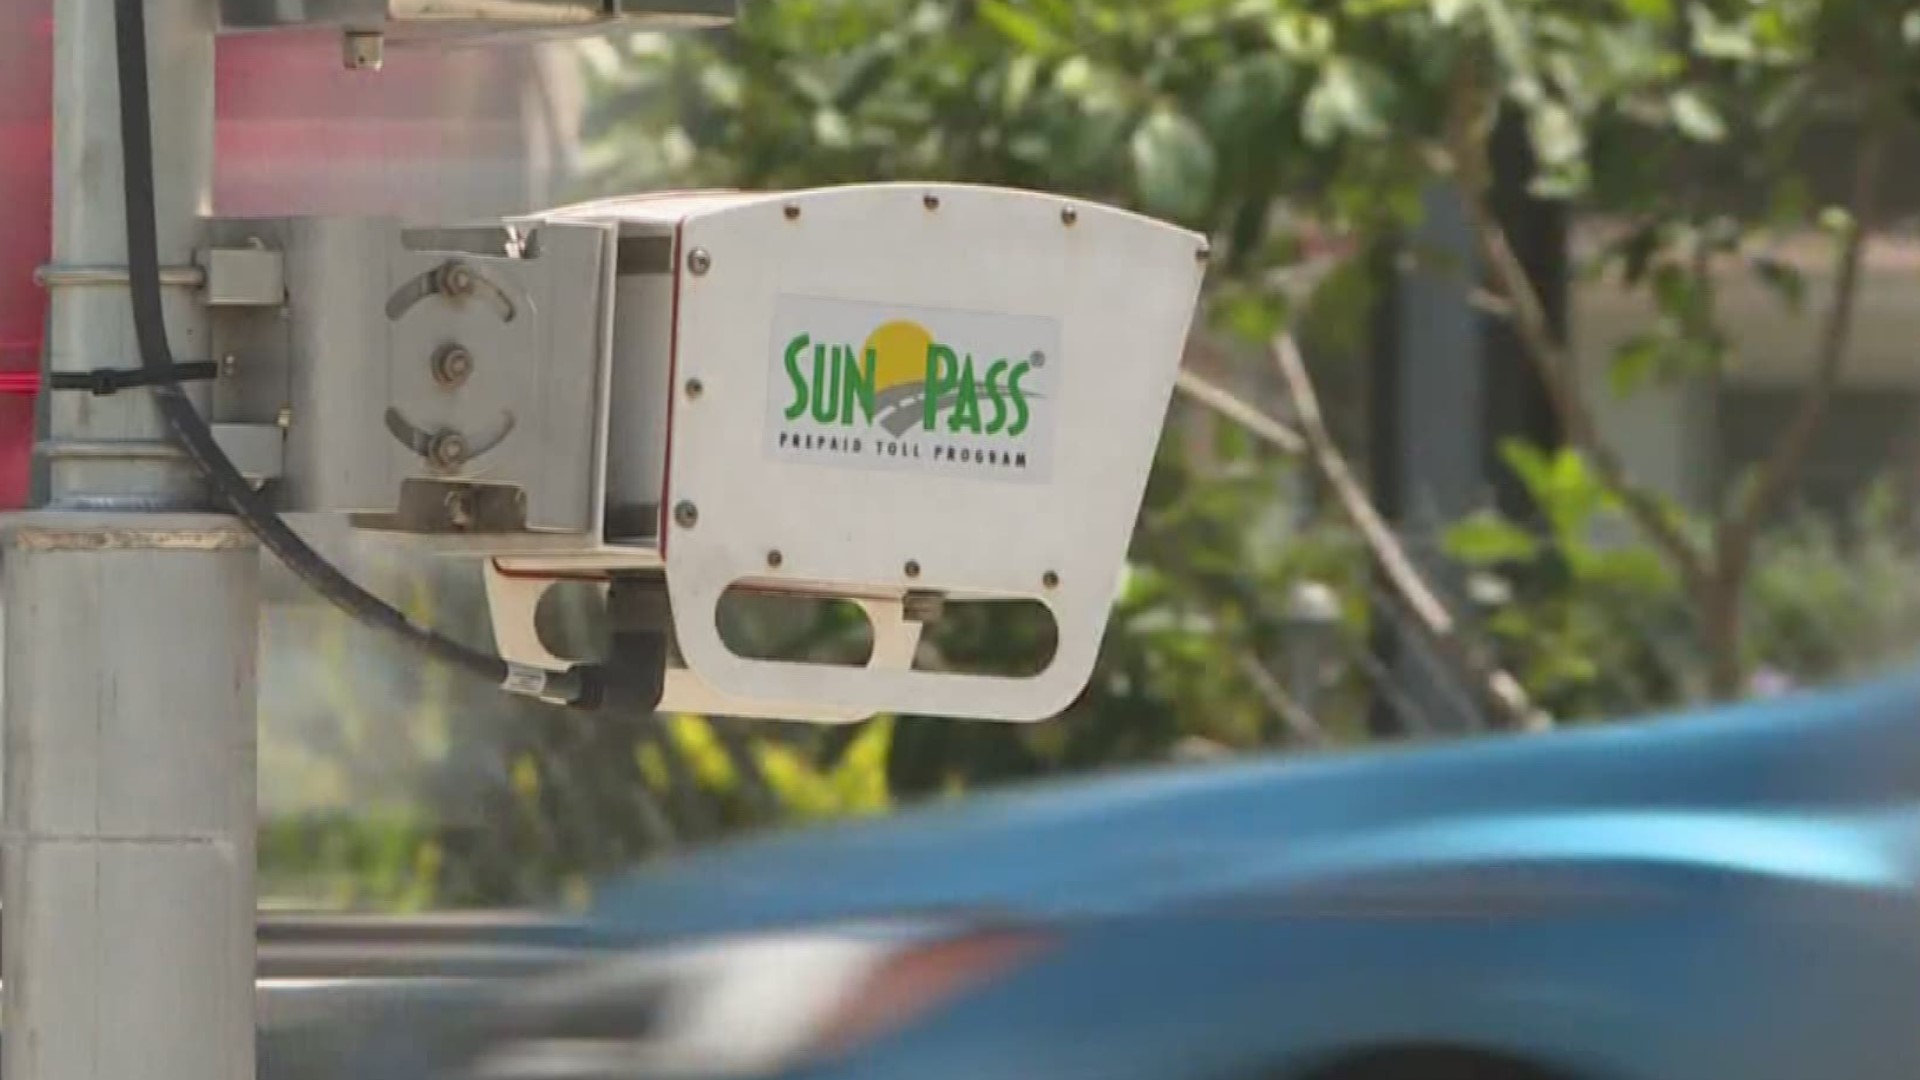 With an election looming, state leaders are delaying big SunPass bills until November.